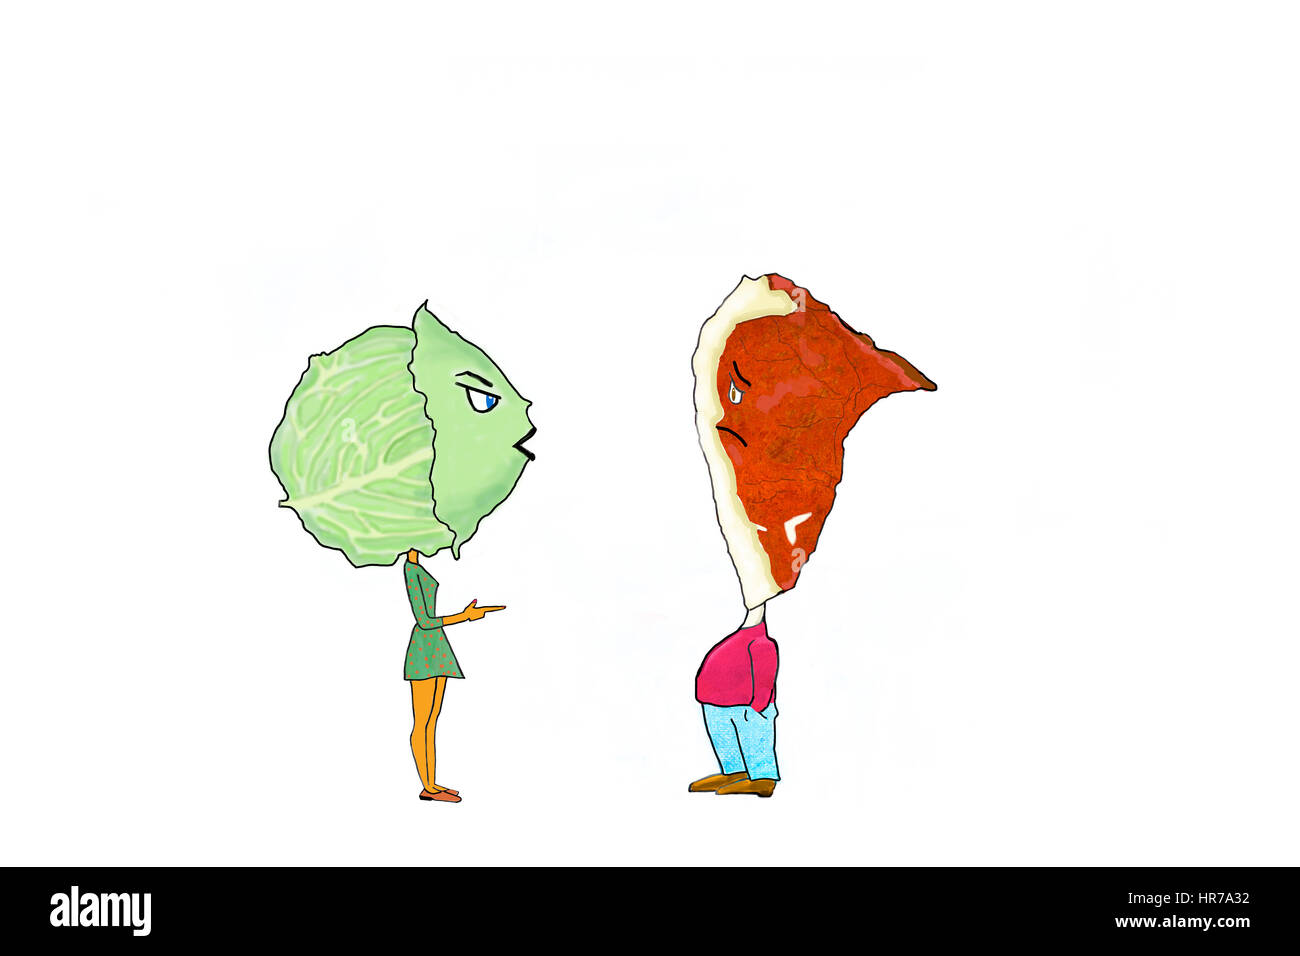 an-illustration-of-a-cabbage-head-woman-